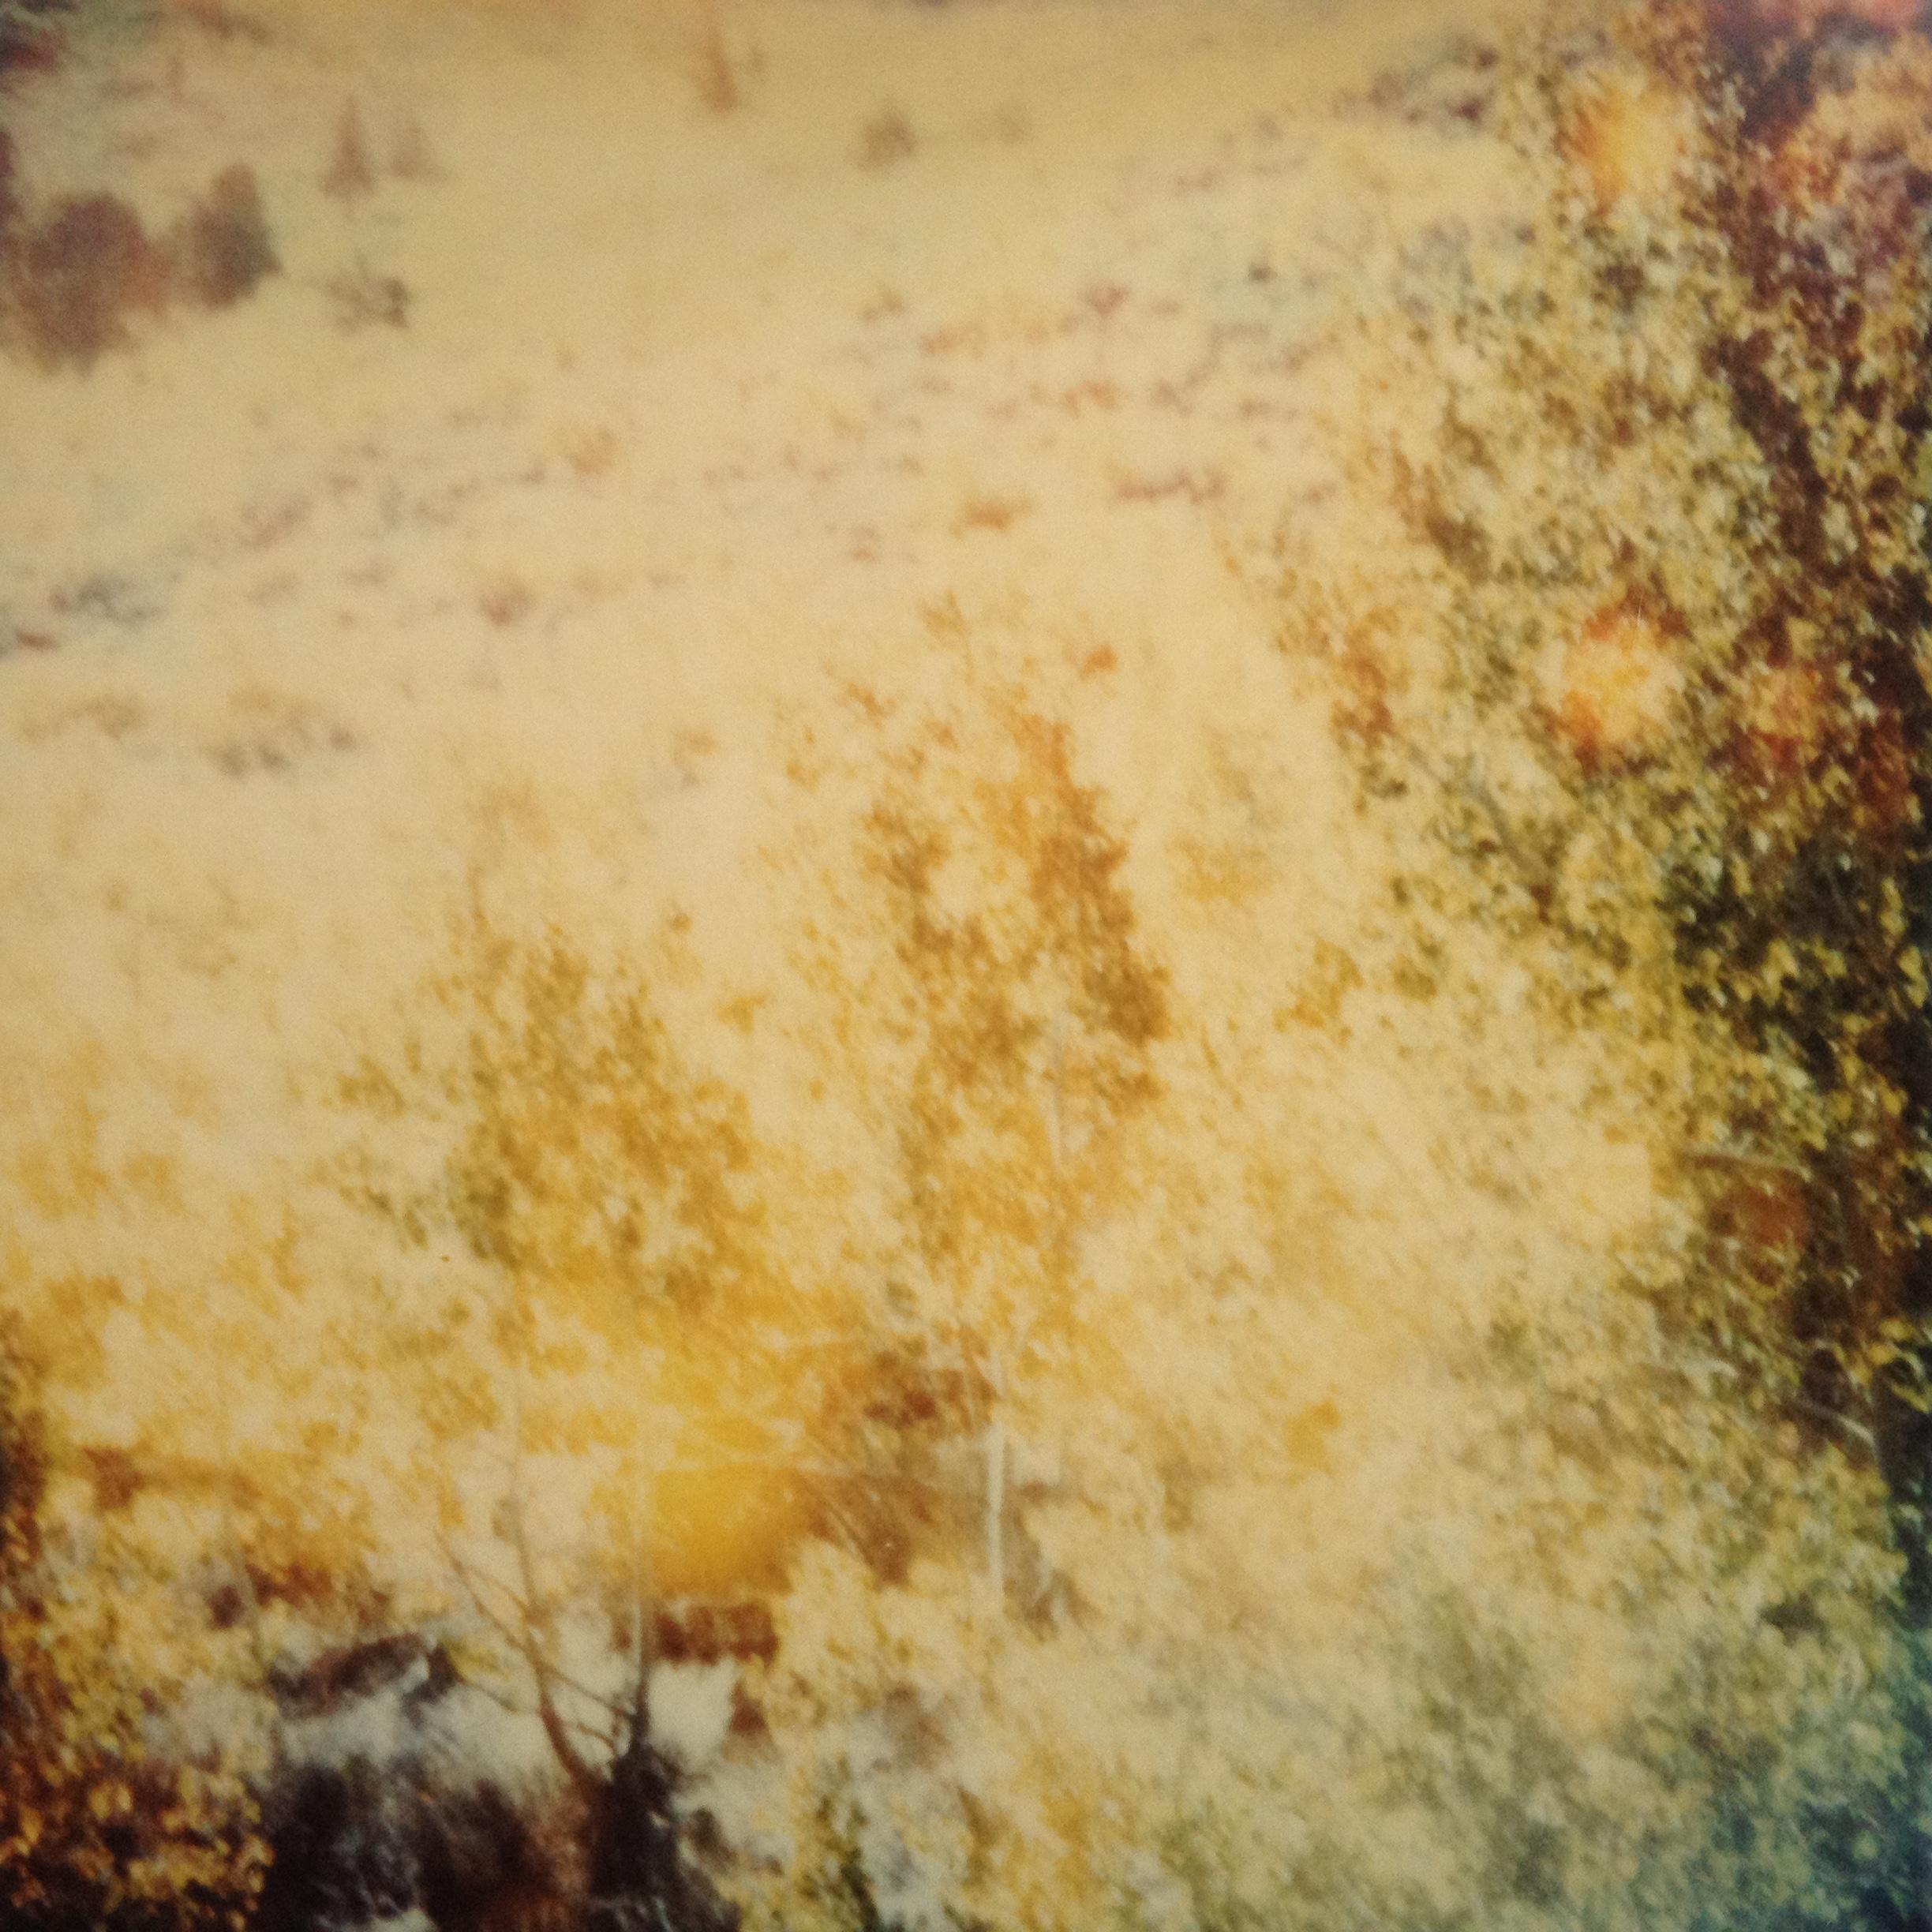 Indian Summer - The Last Picture Show, analog, 58x56cm Polaroid - Contemporary Photograph by Stefanie Schneider